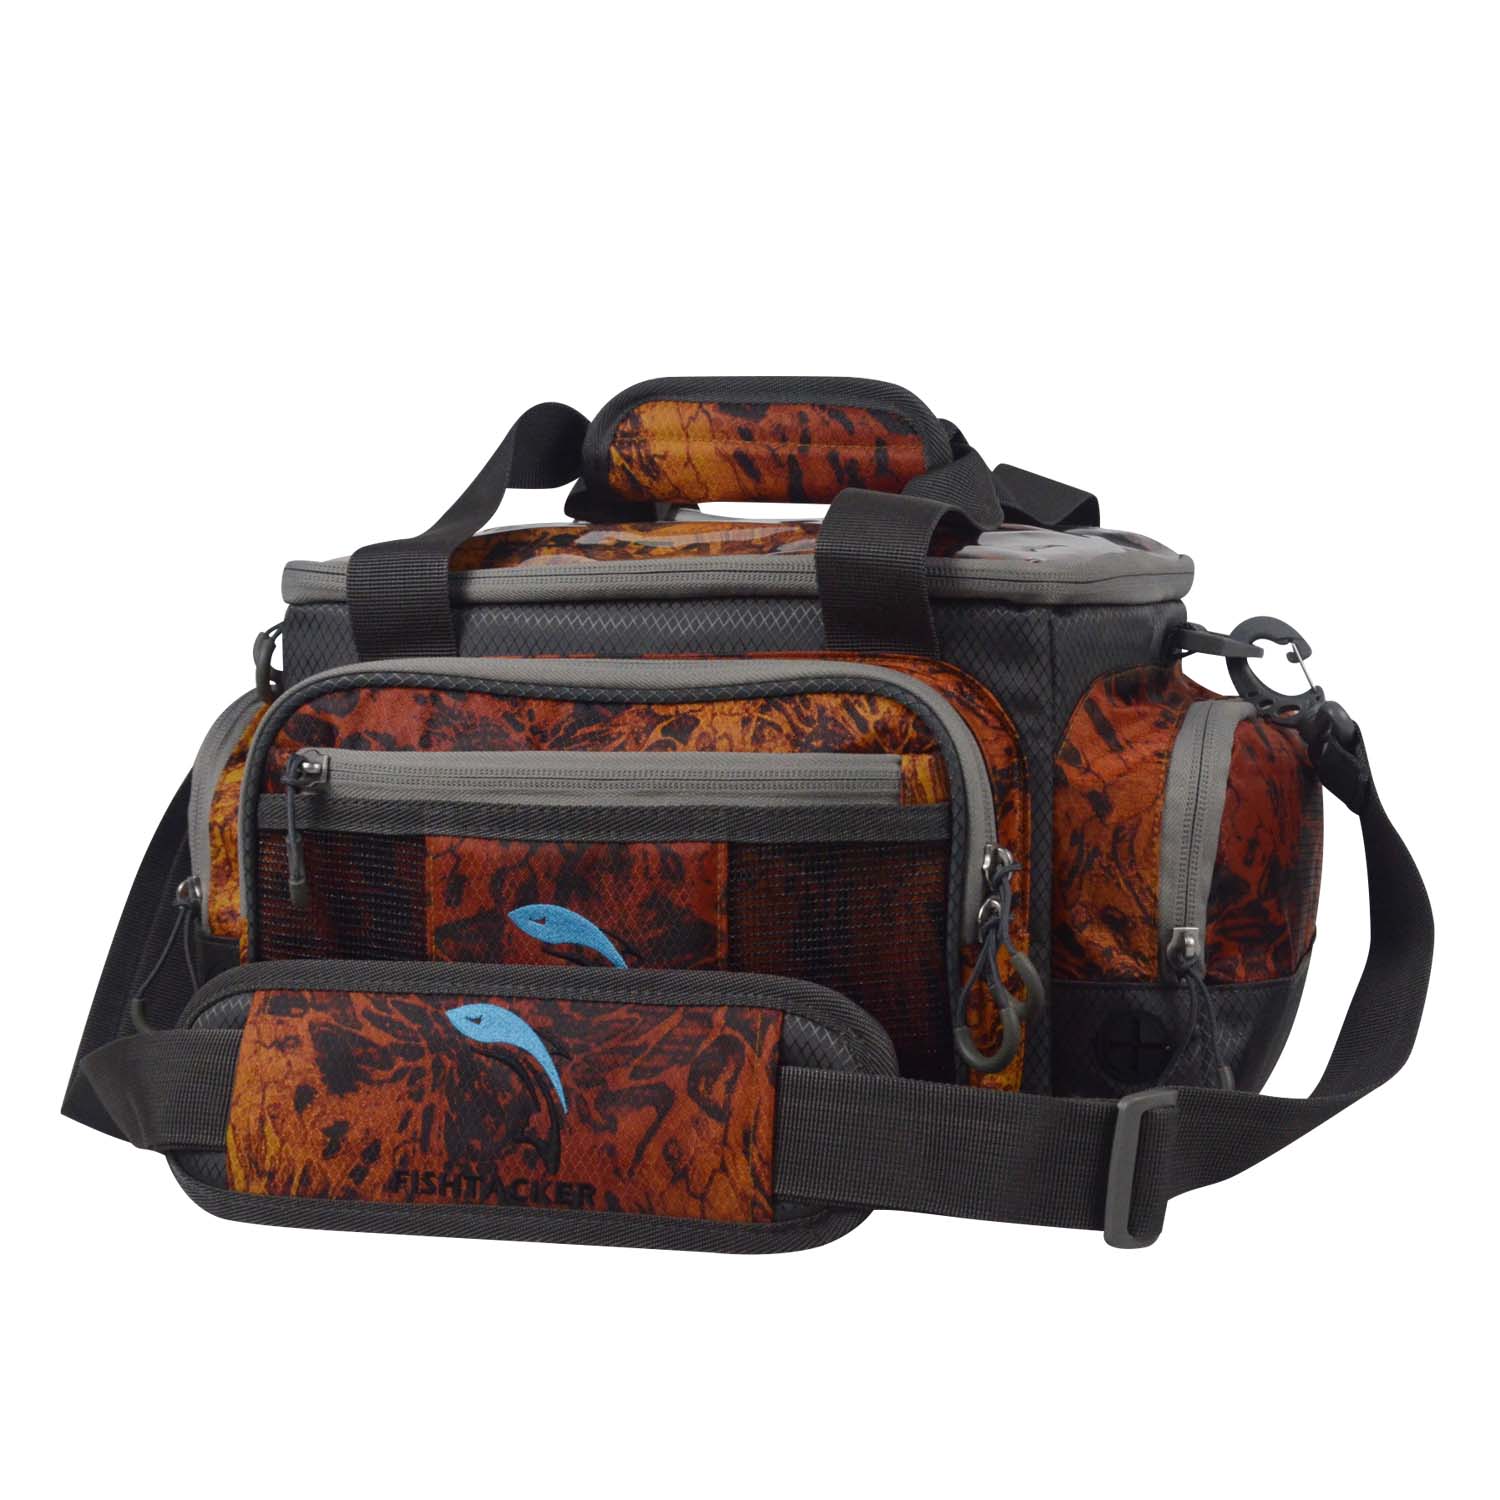 Fishing Tackle Bags Large Saltwater Resistant Fishing Bags Fishing Tackle Storage Bags 3600 3700 Tackle Box